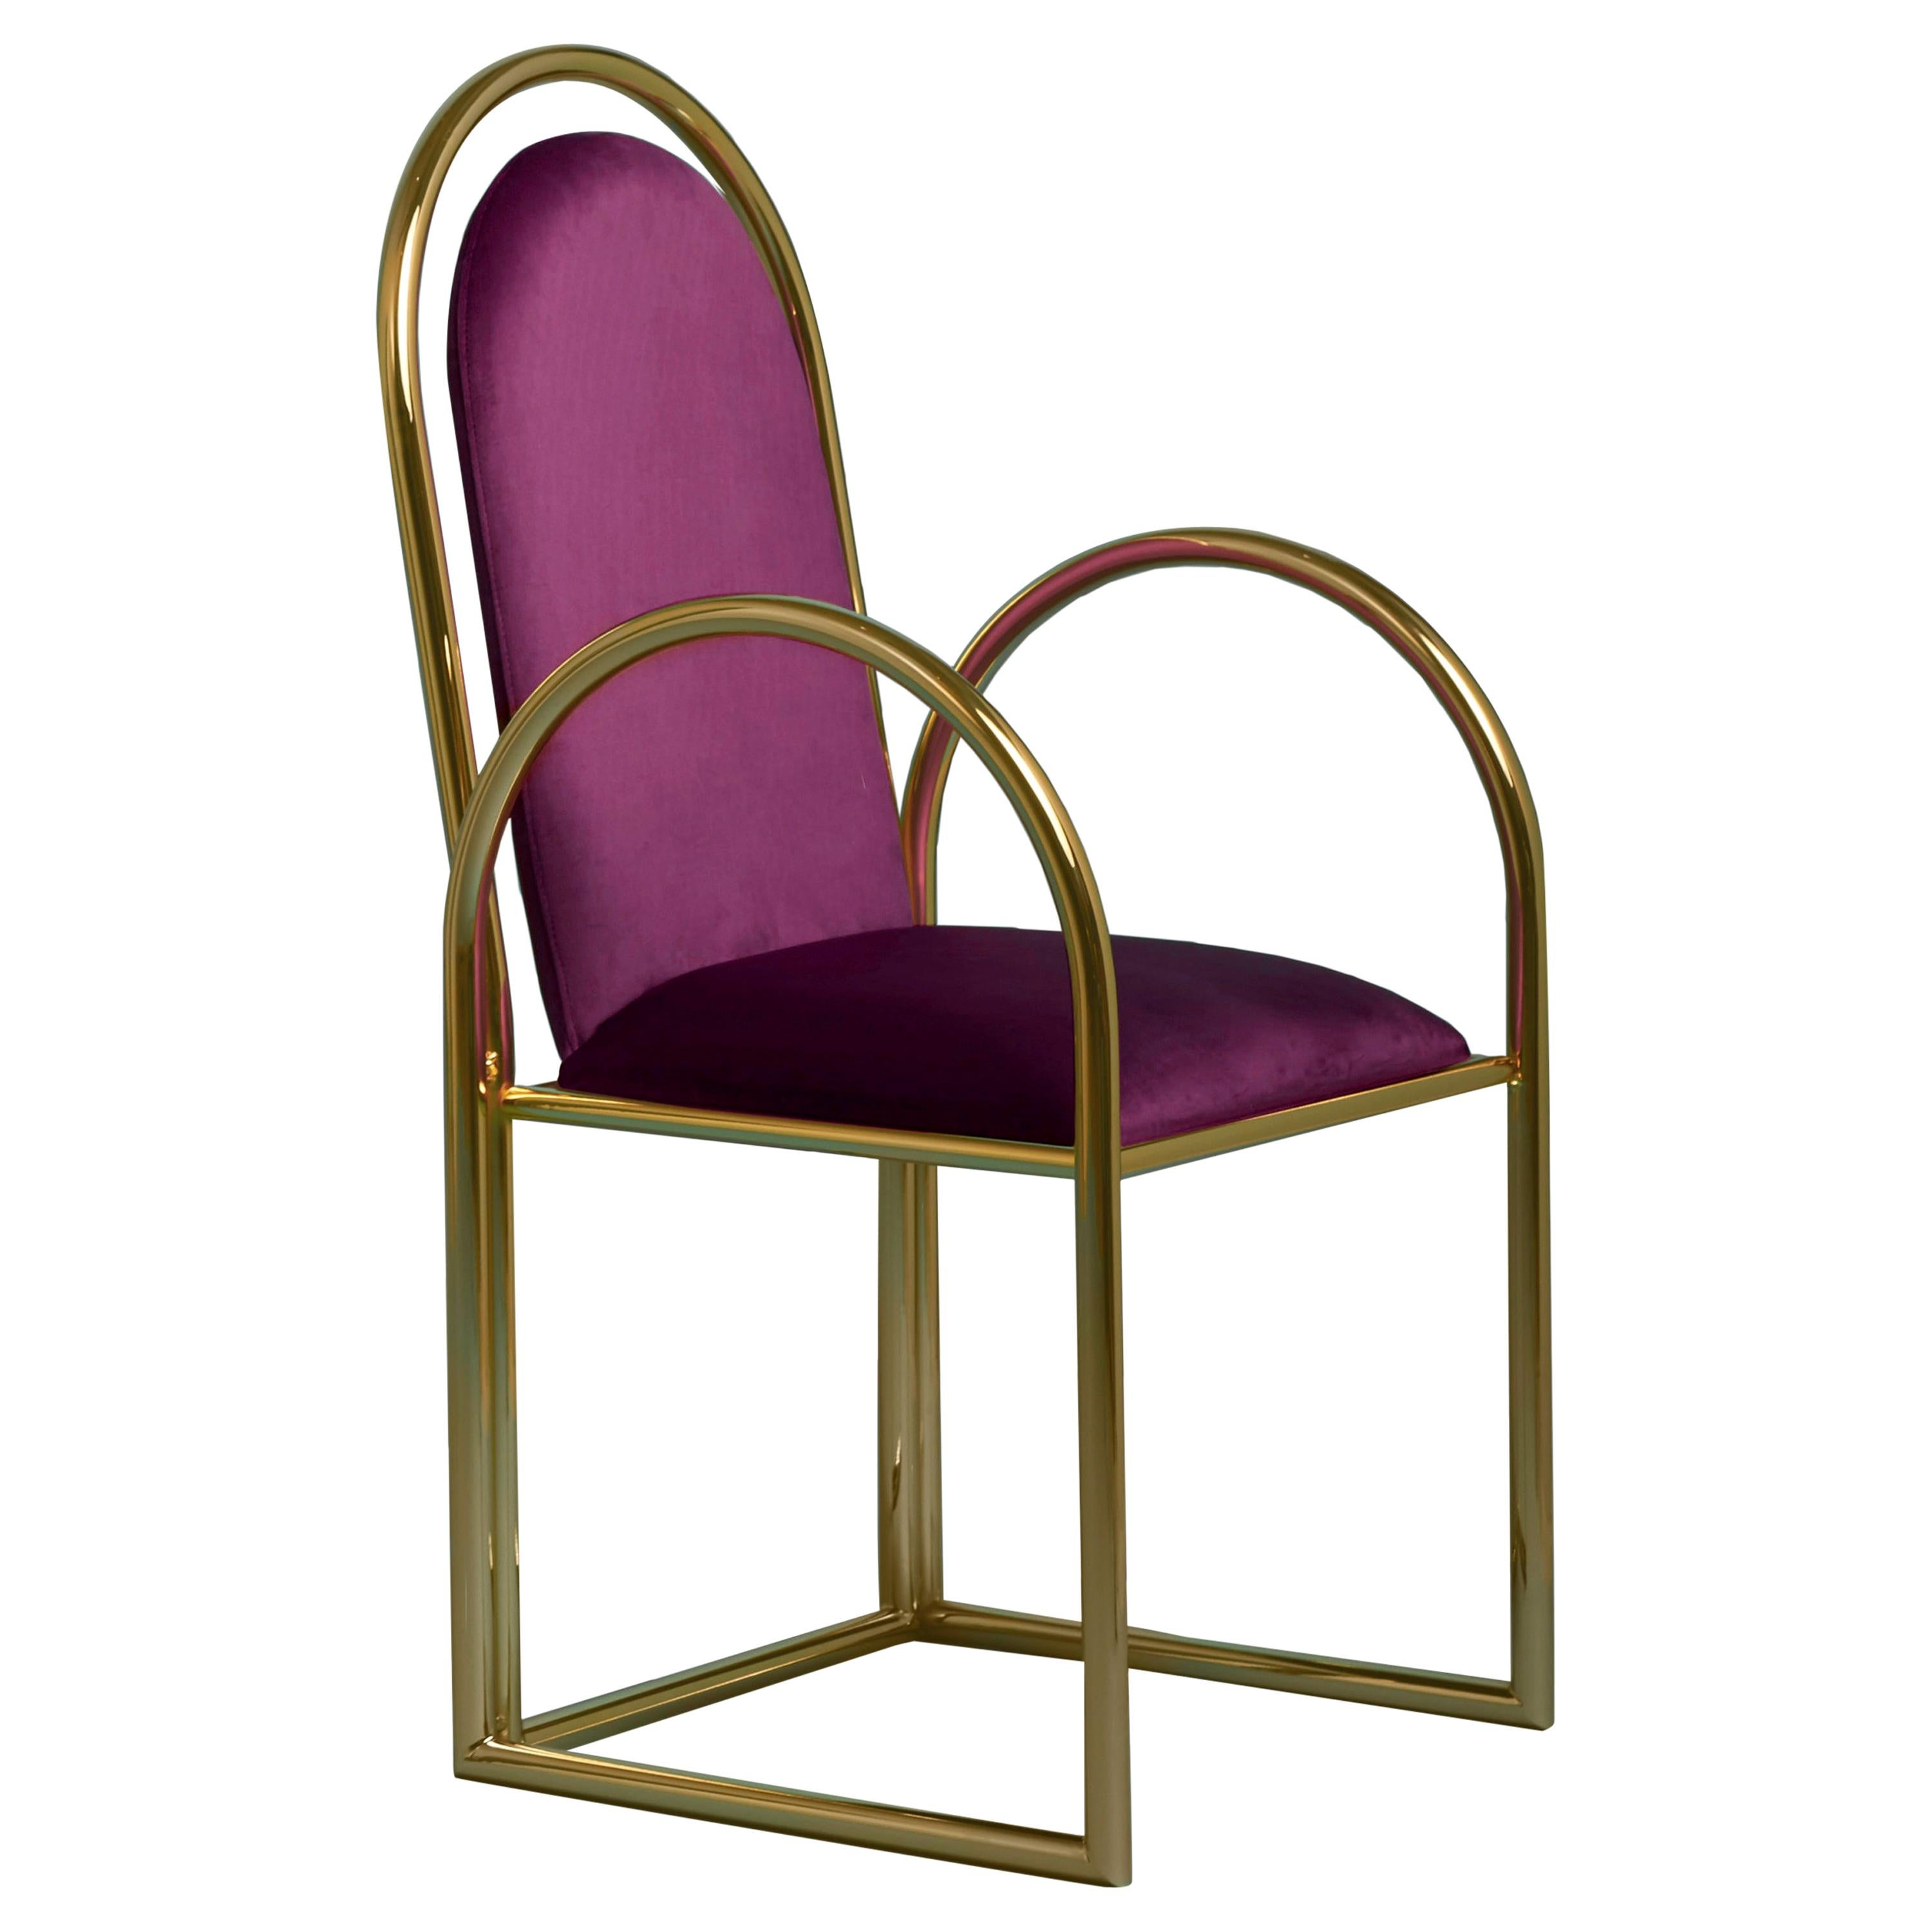 Set of 4 Arco chairs by Houtique
Materials: Metallic structure bathed in 24 Ct gold // epoxy paint
Upholstery Velvet
Dimensions: 47 x 45 x H 100 cm
Seat Height: 46 cm

Chairs, tables and stools with fun shapes inspired in the